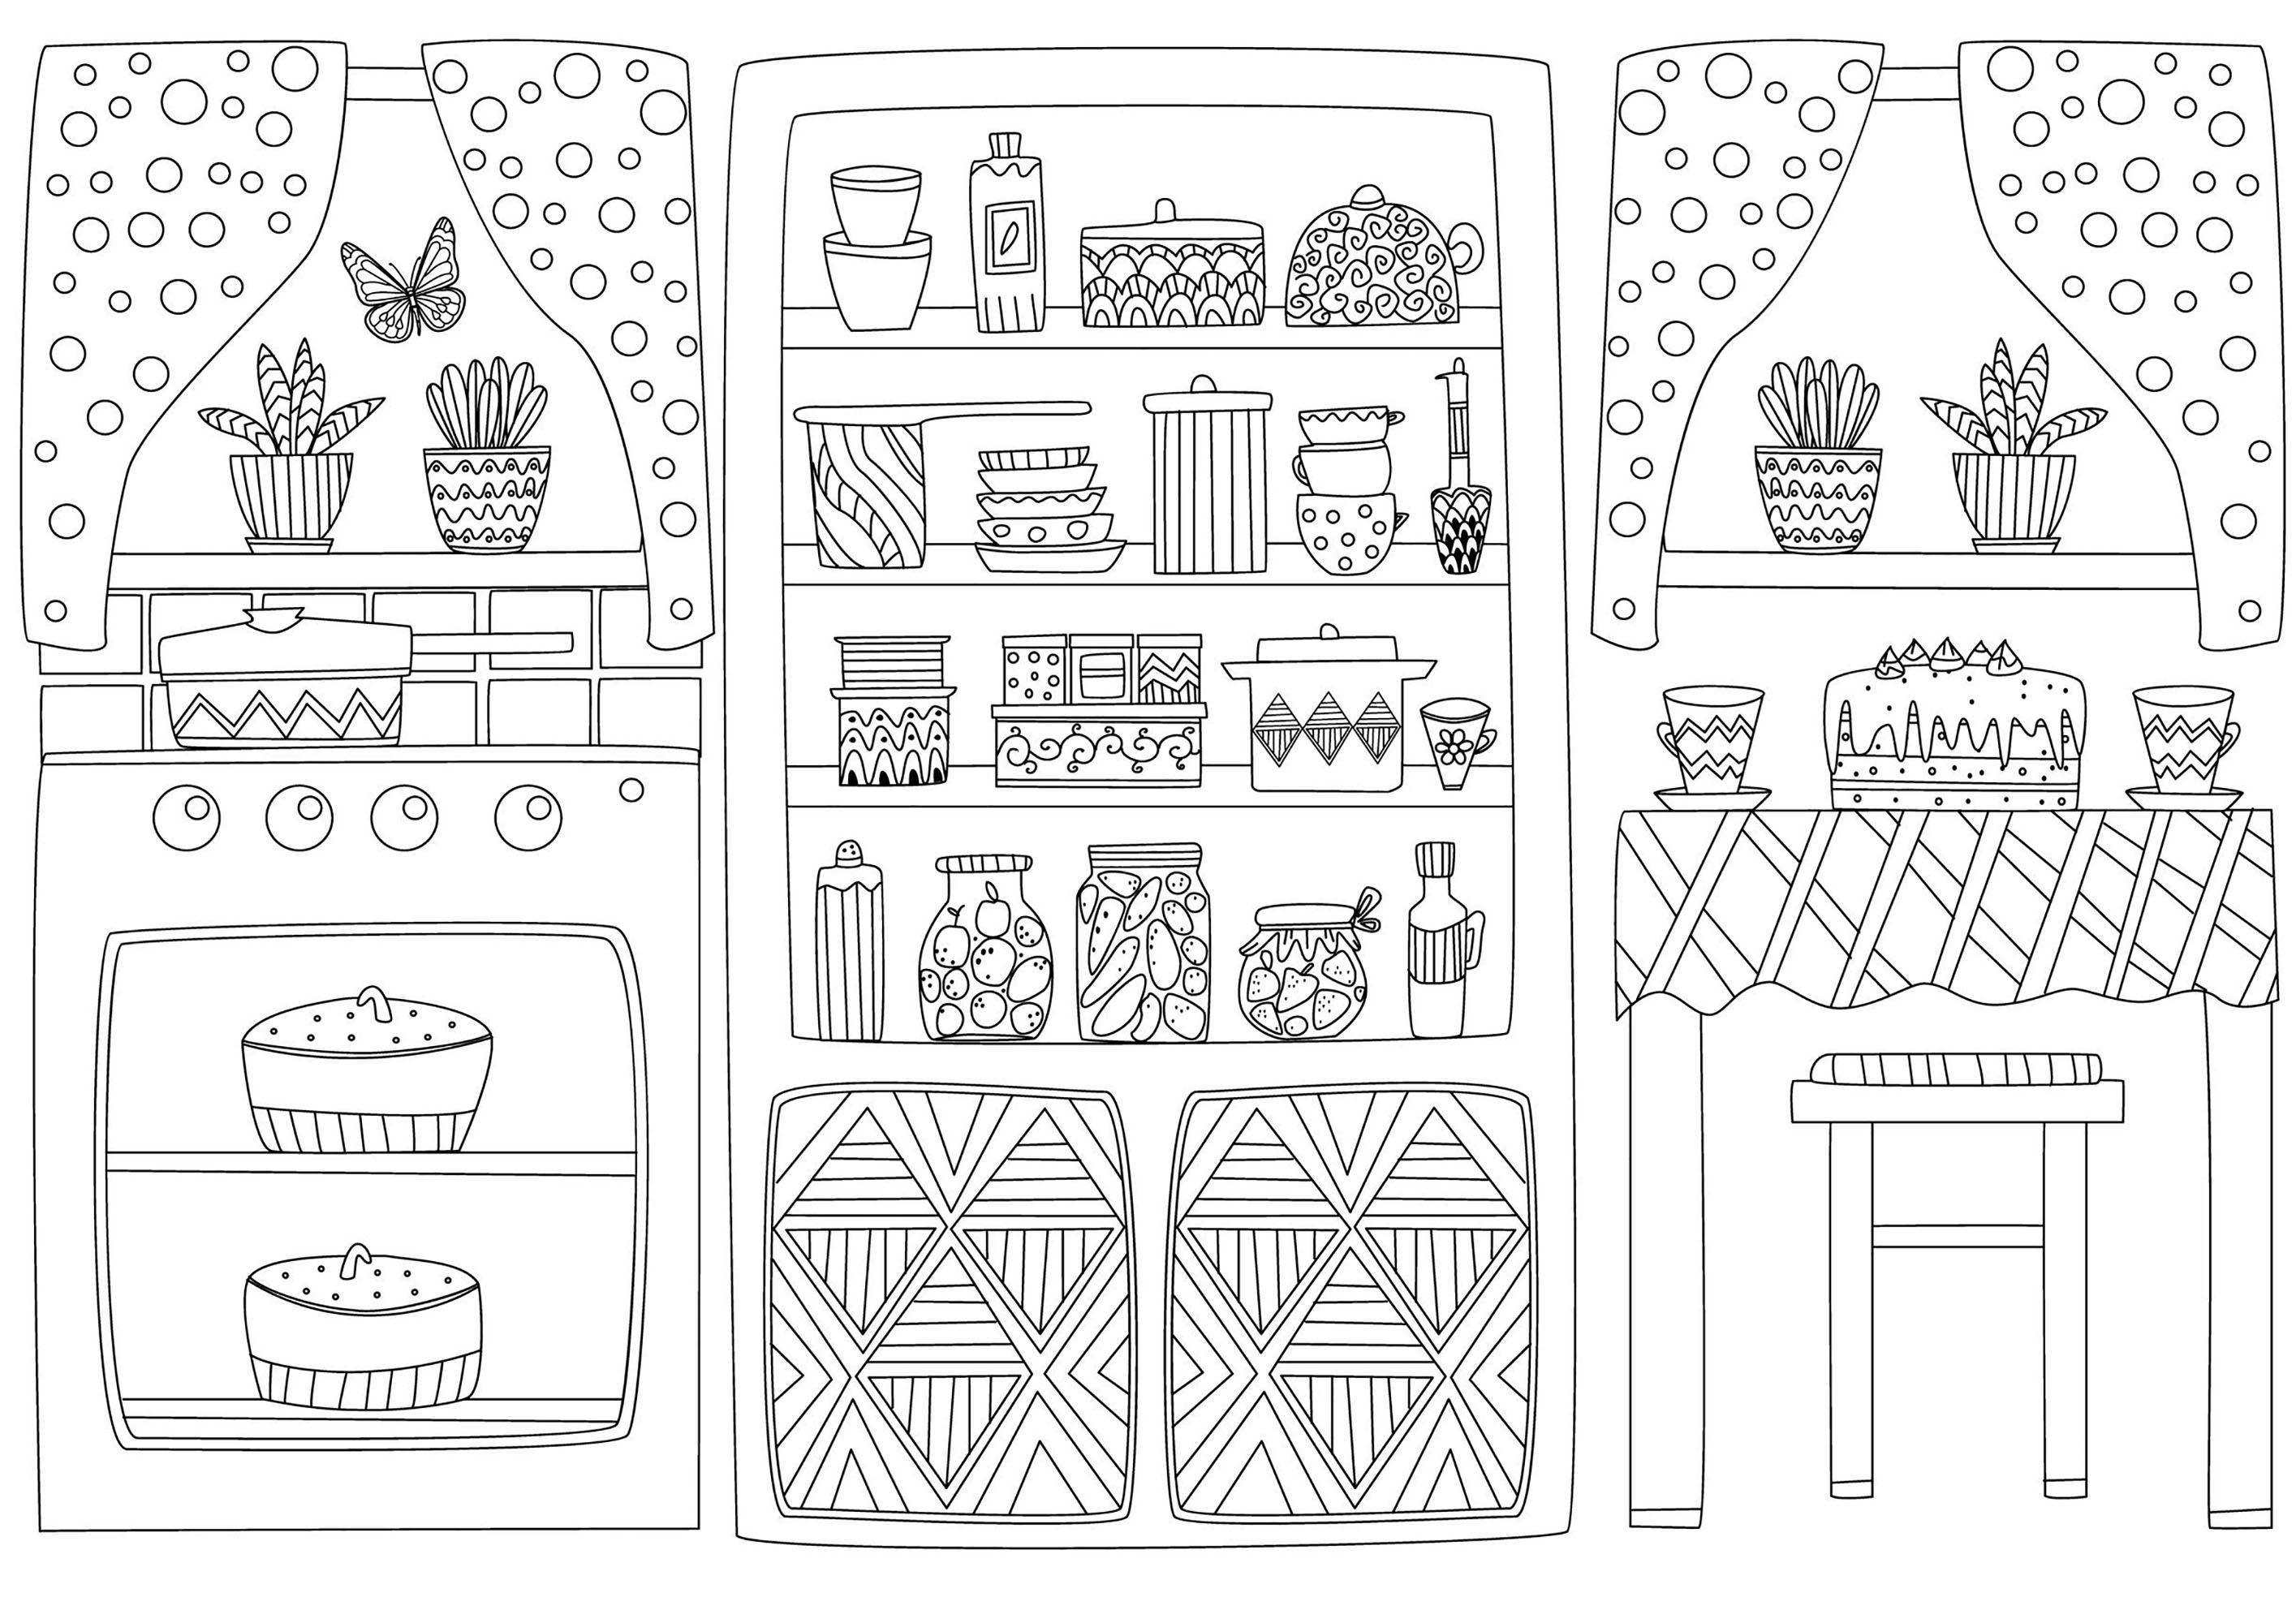 To color this kitchen will make you want to cook !, Artist : Oksana Alekseeva ;$SOURCE$ 123rf